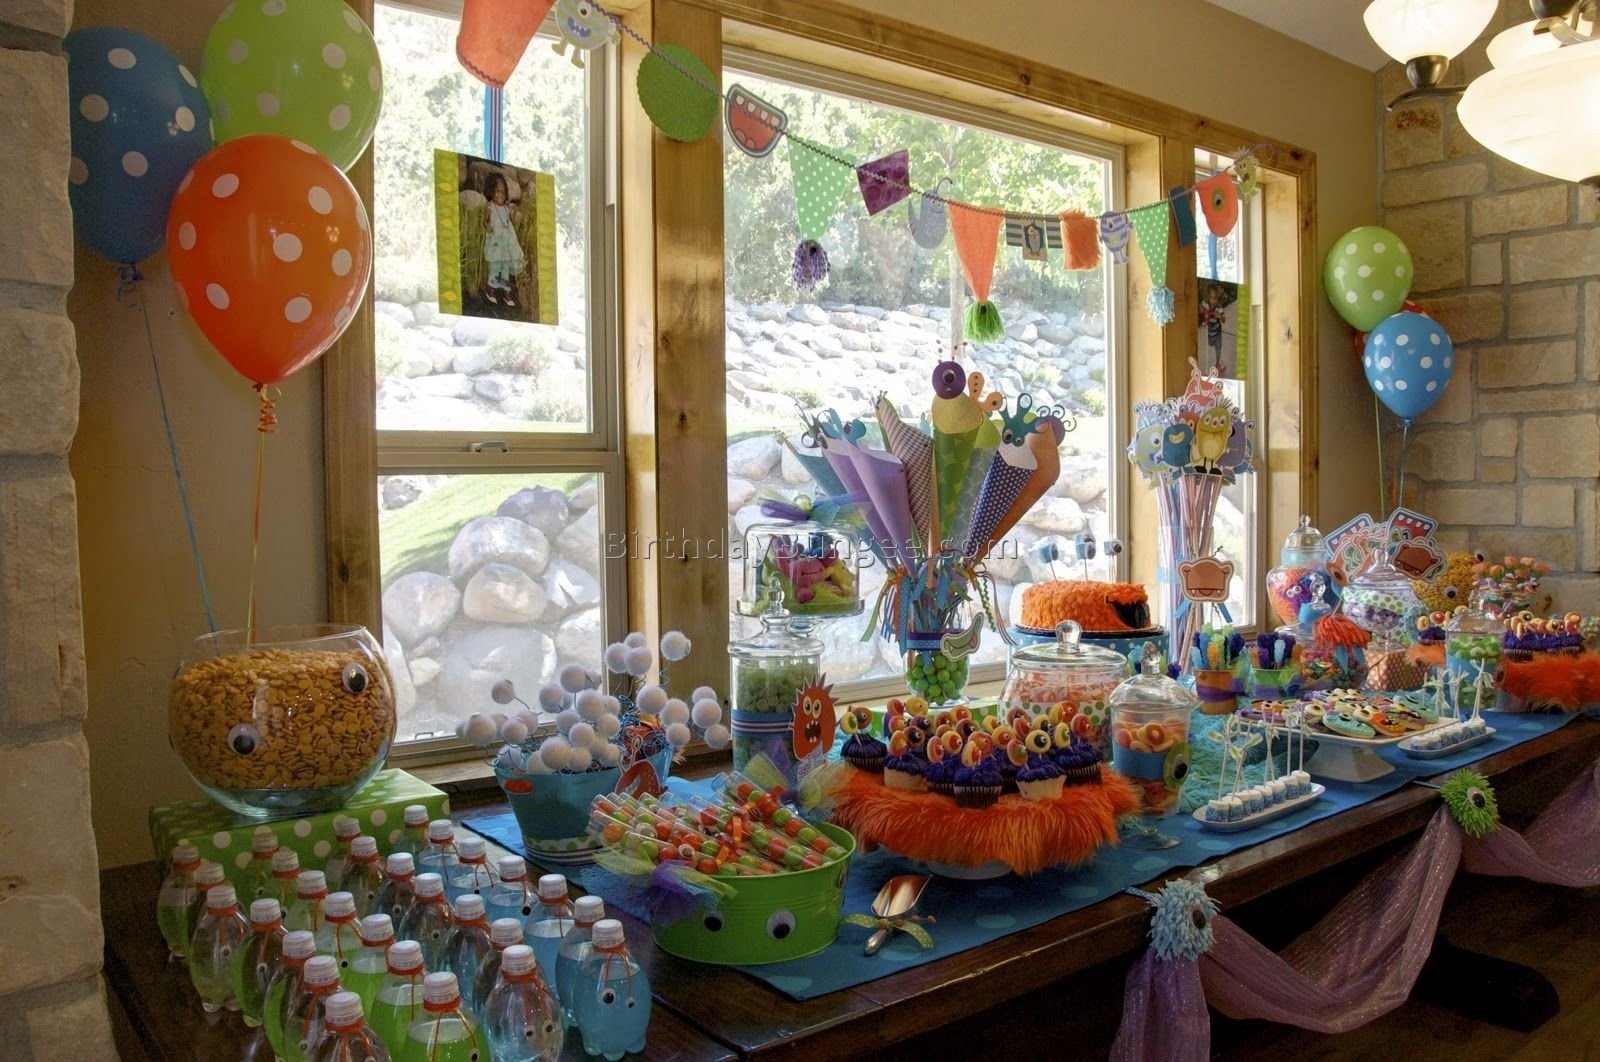 10 Gorgeous Birthday Ideas For 3 Year Old 11 year old birthday party ideas at home home design ideas 12 2022